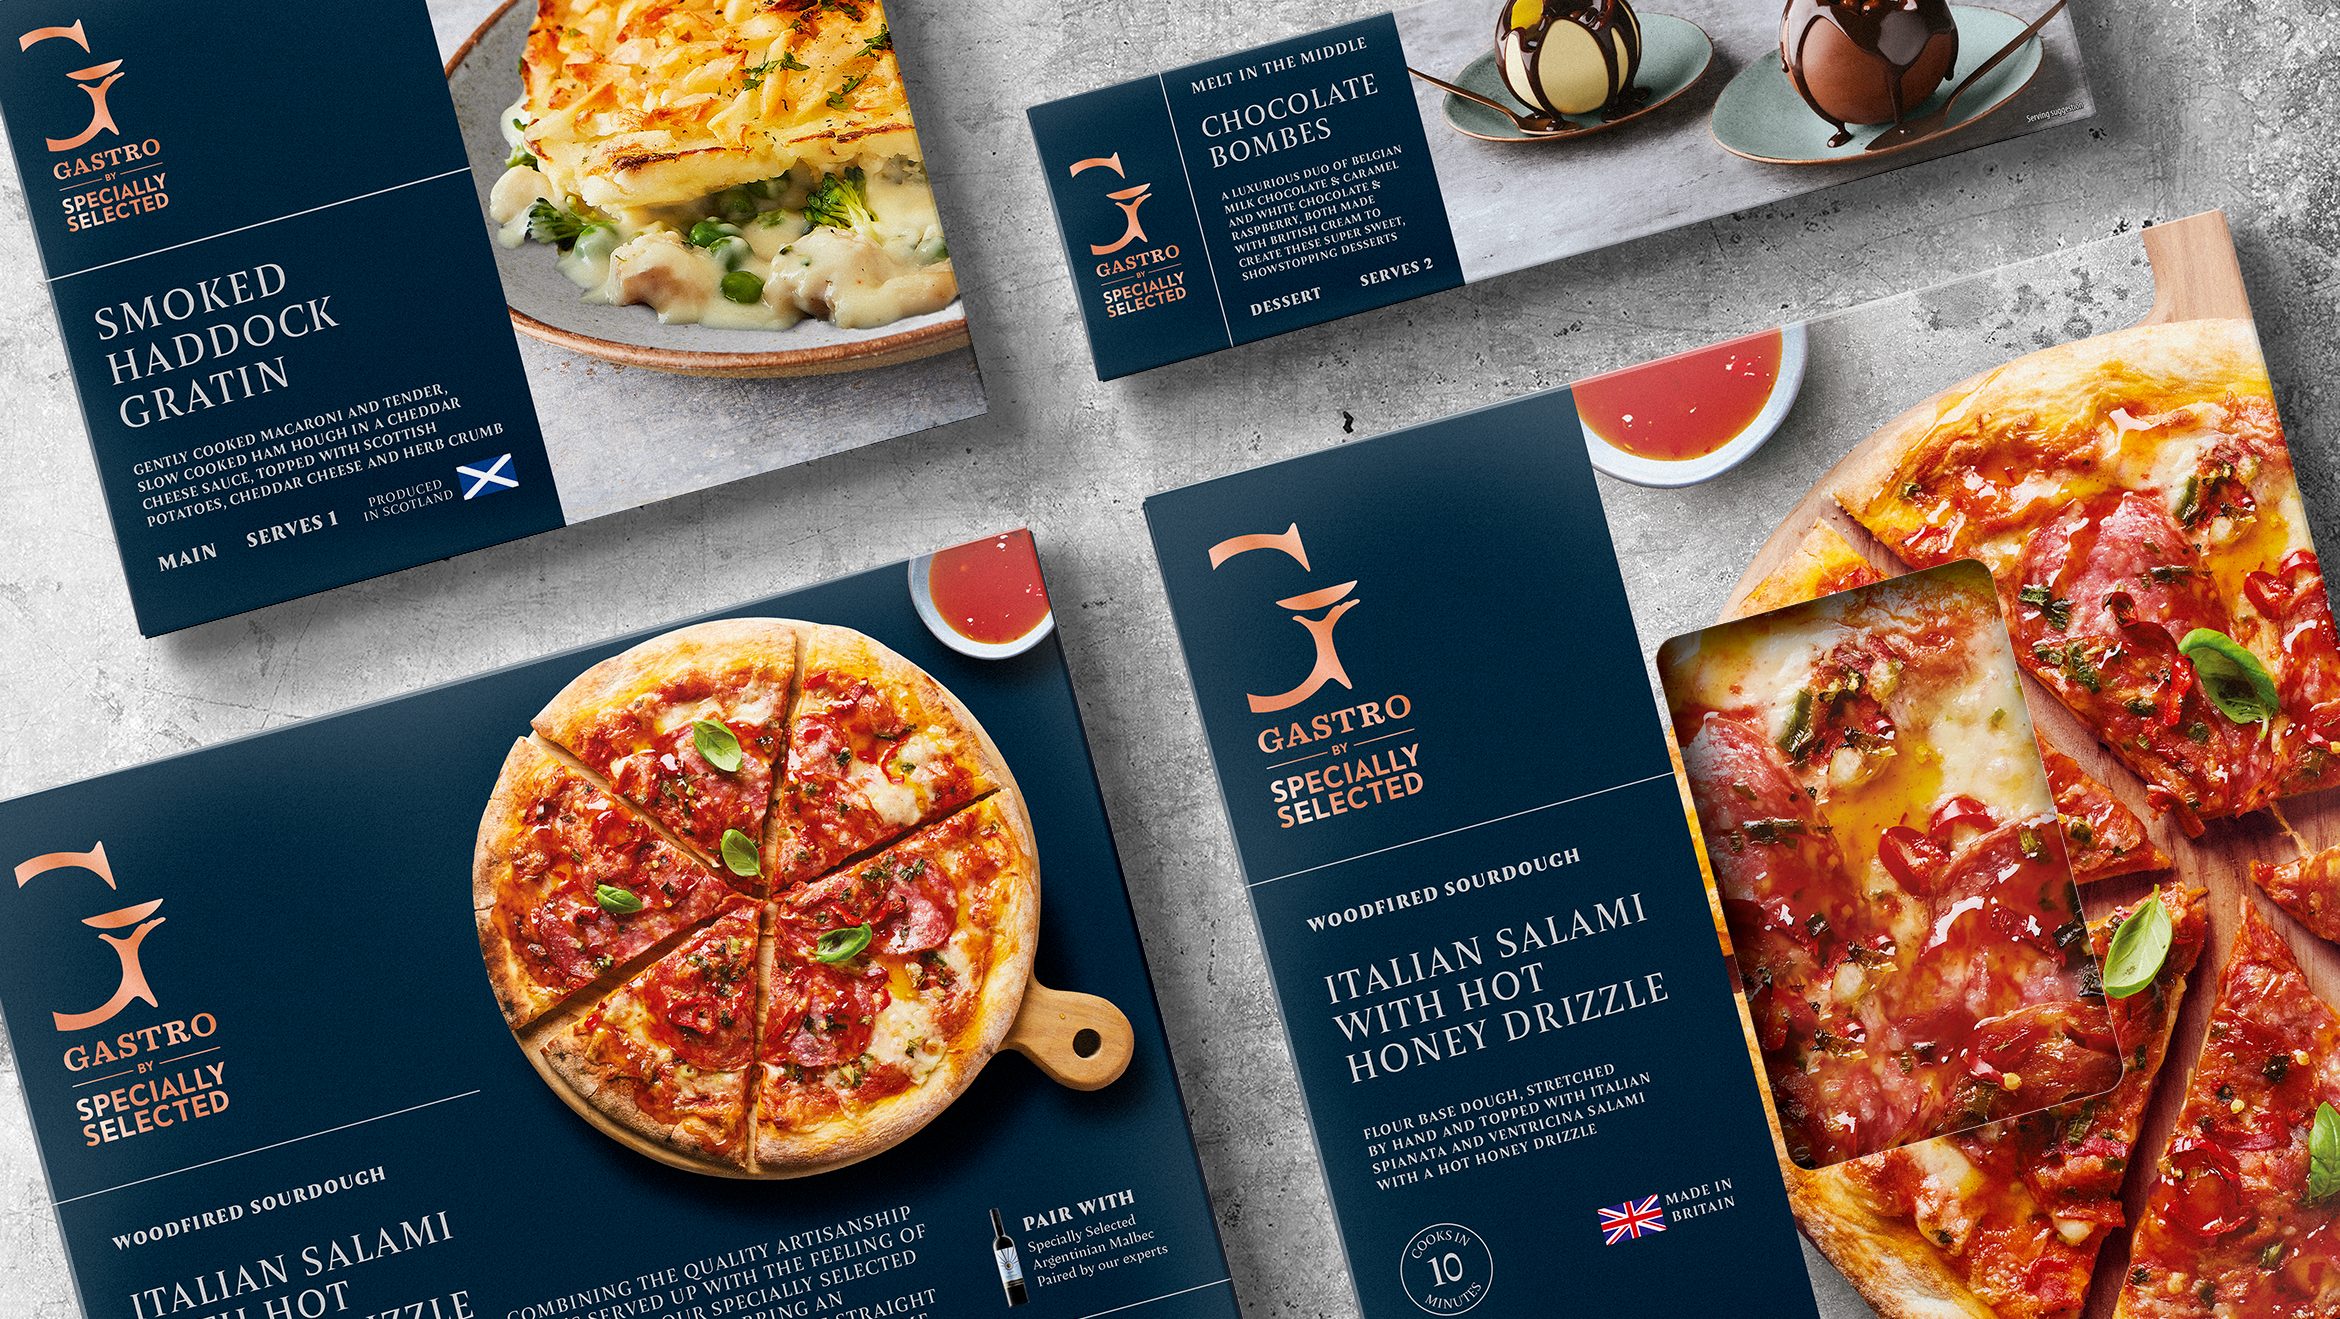 Aldi Gastro – Premium ready meals infused with artisanal flair image